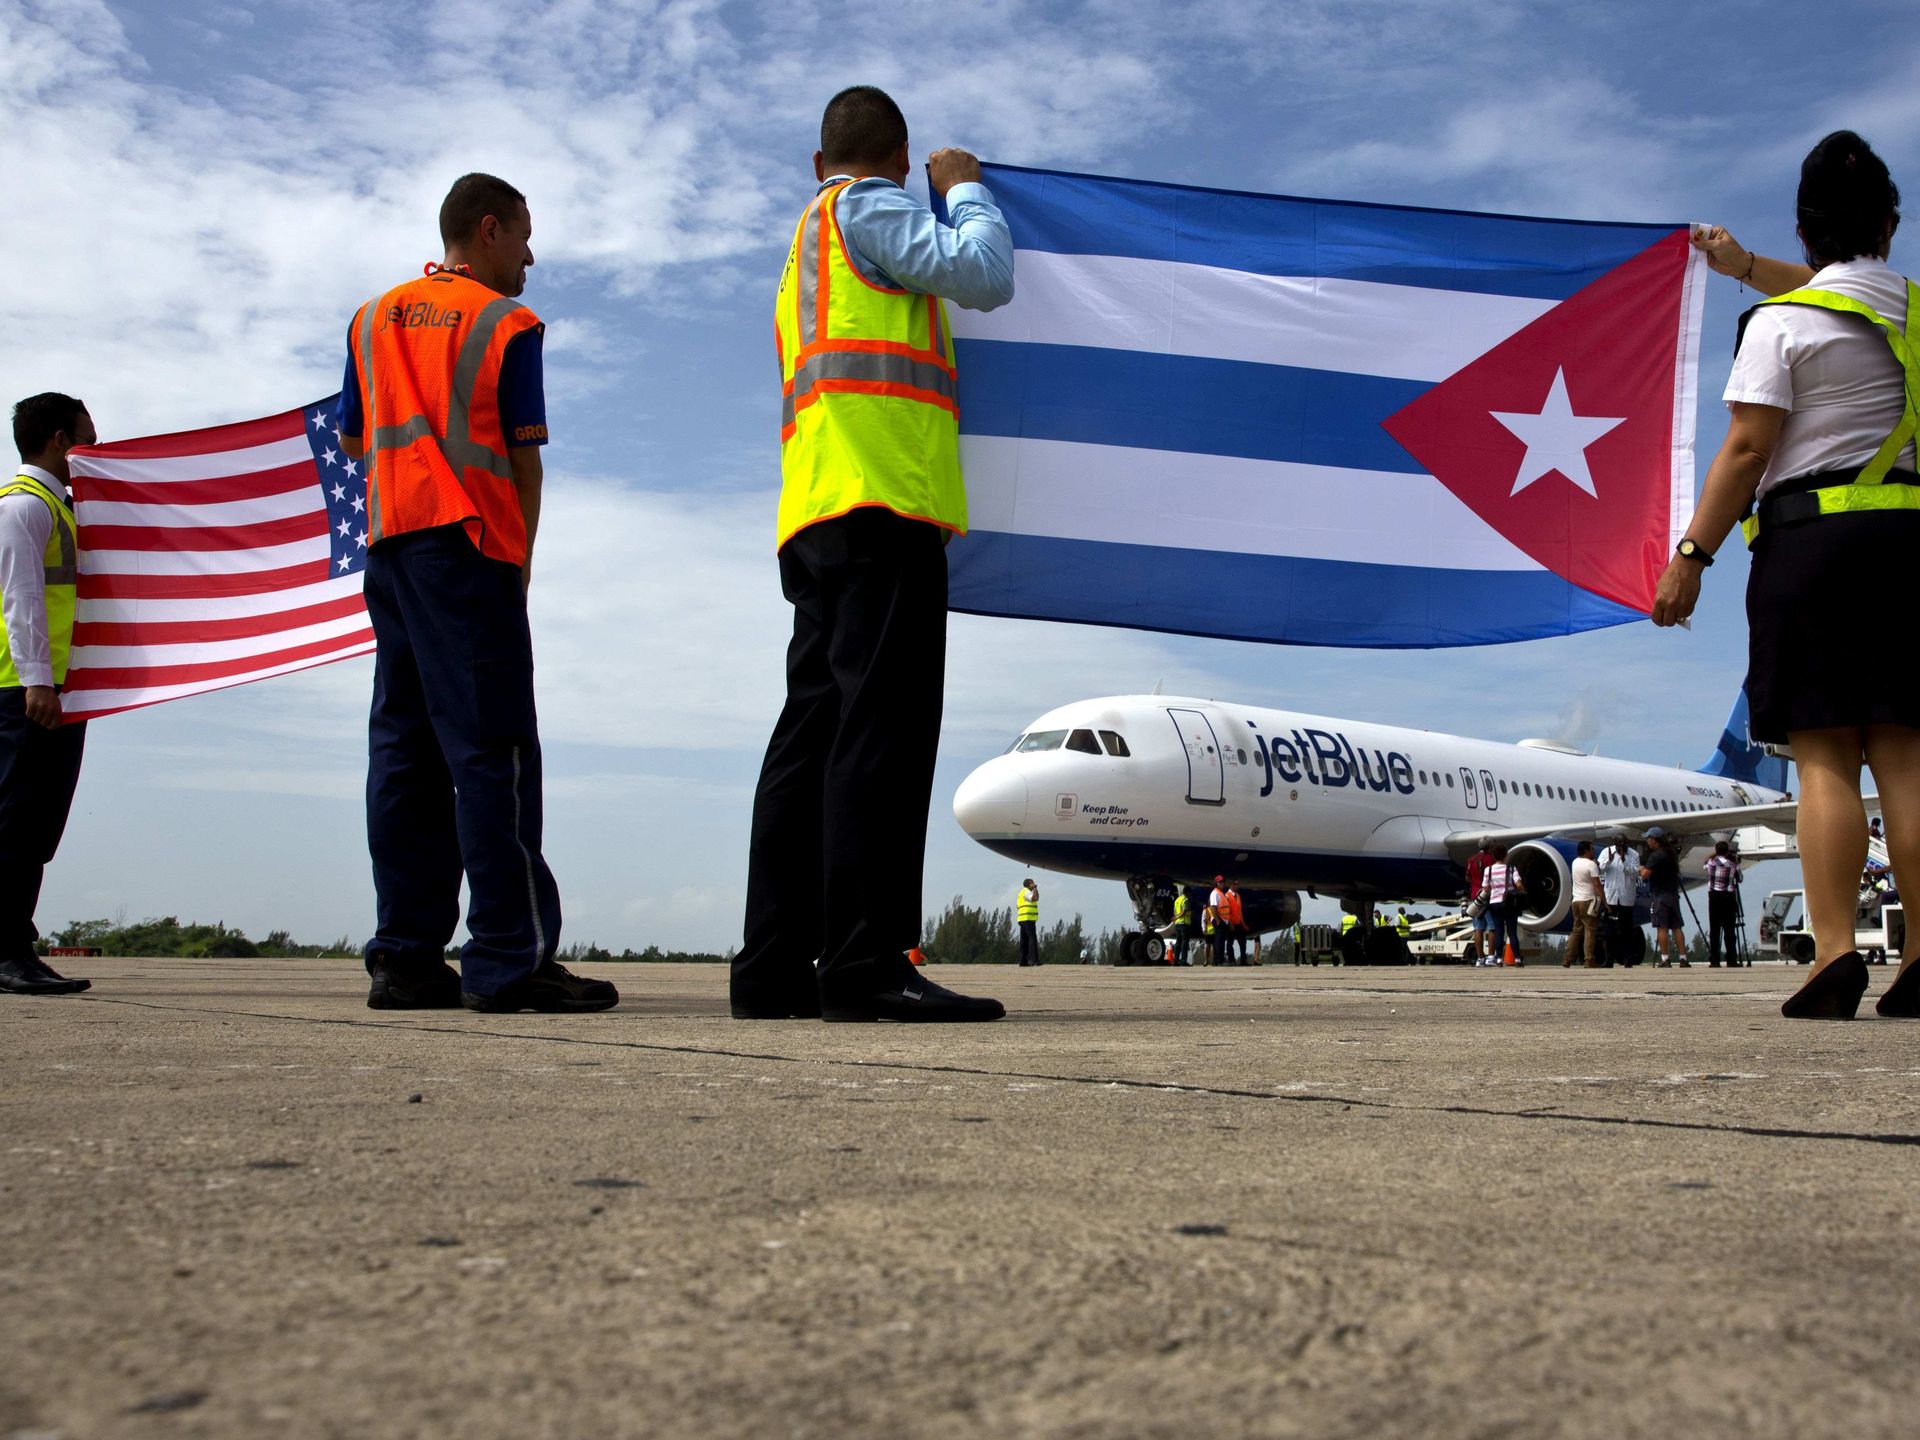 First U.S. commercial flight to Cuba since 1961. From Fort Lauderdale to Santa Clara. Photo by USA Today.